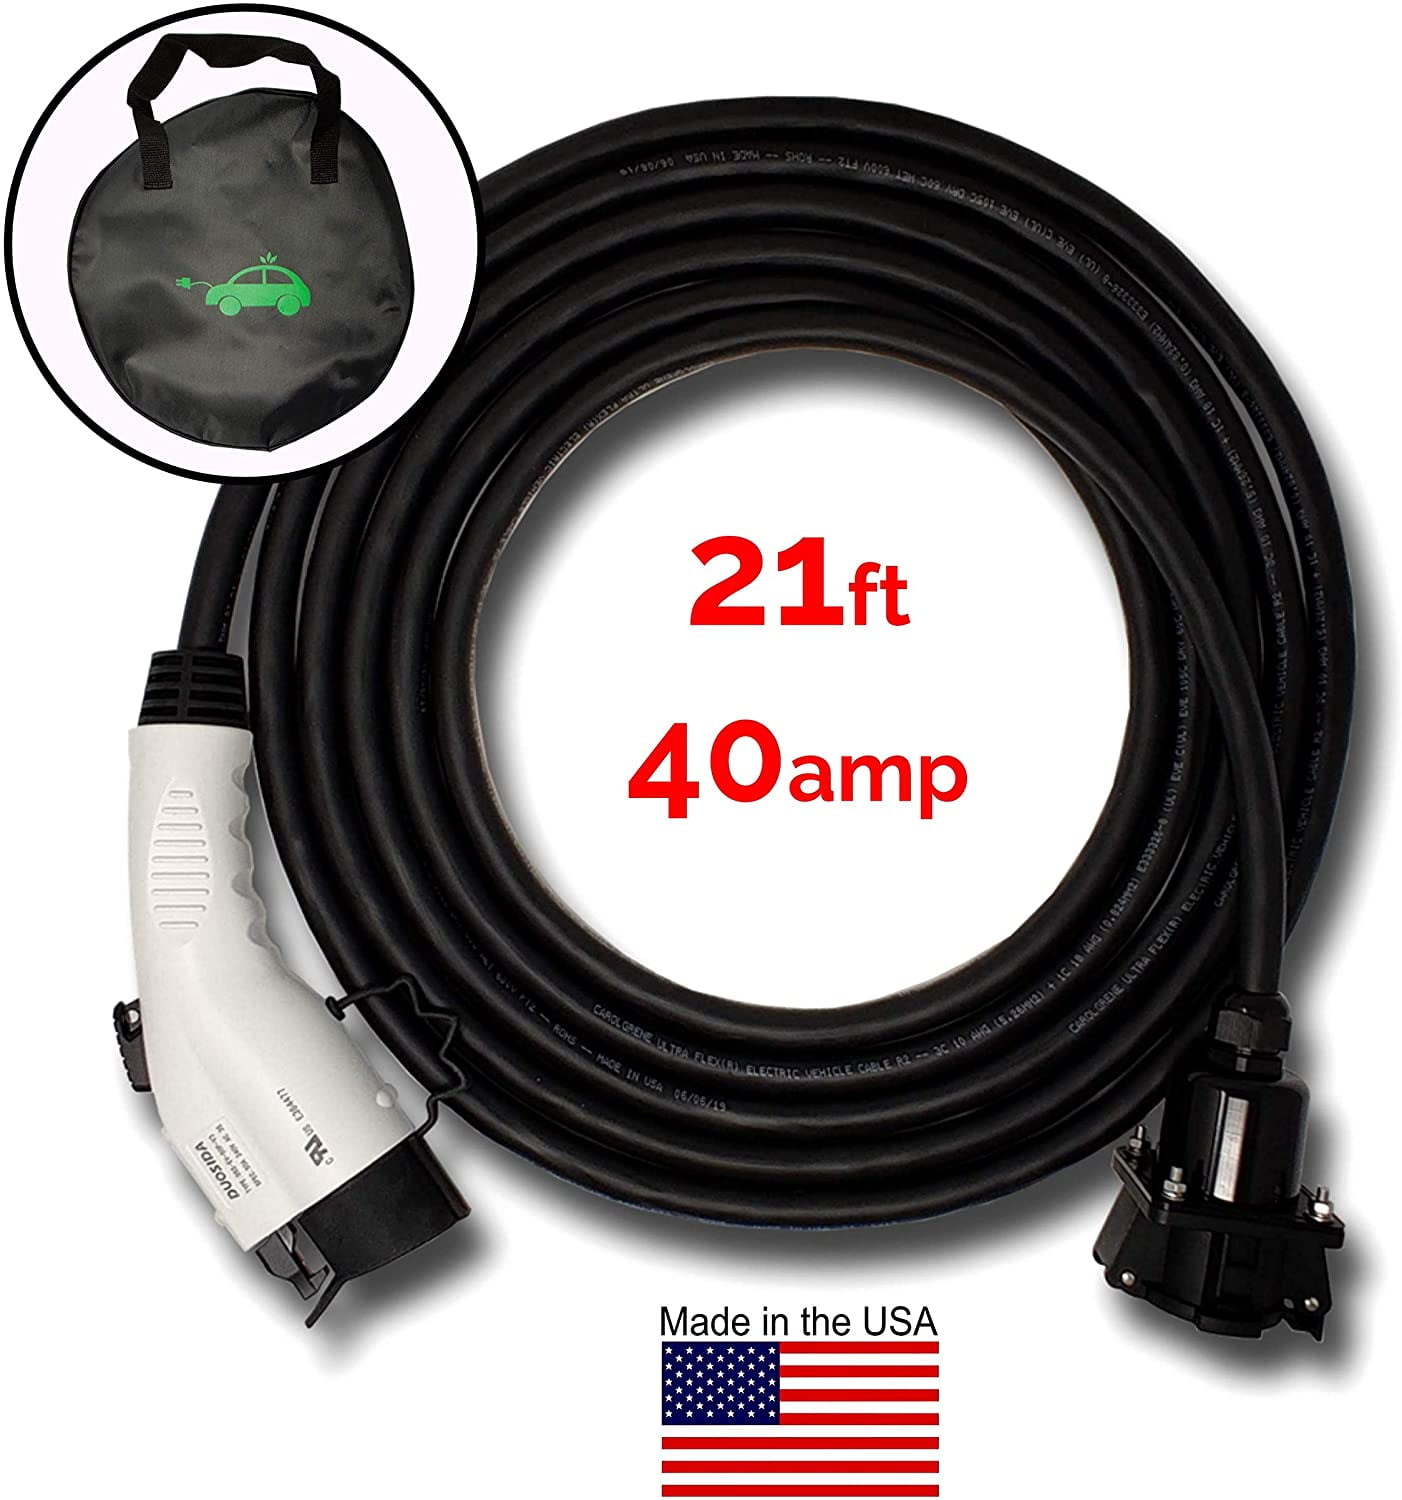 Inteset 21ft 40amp J1772 EV Extension Cord, Made in USA - for Electric  Vehicle Charging Stations, Carrying Bag, Ultra-Flex Cable, UL Listed Parts  